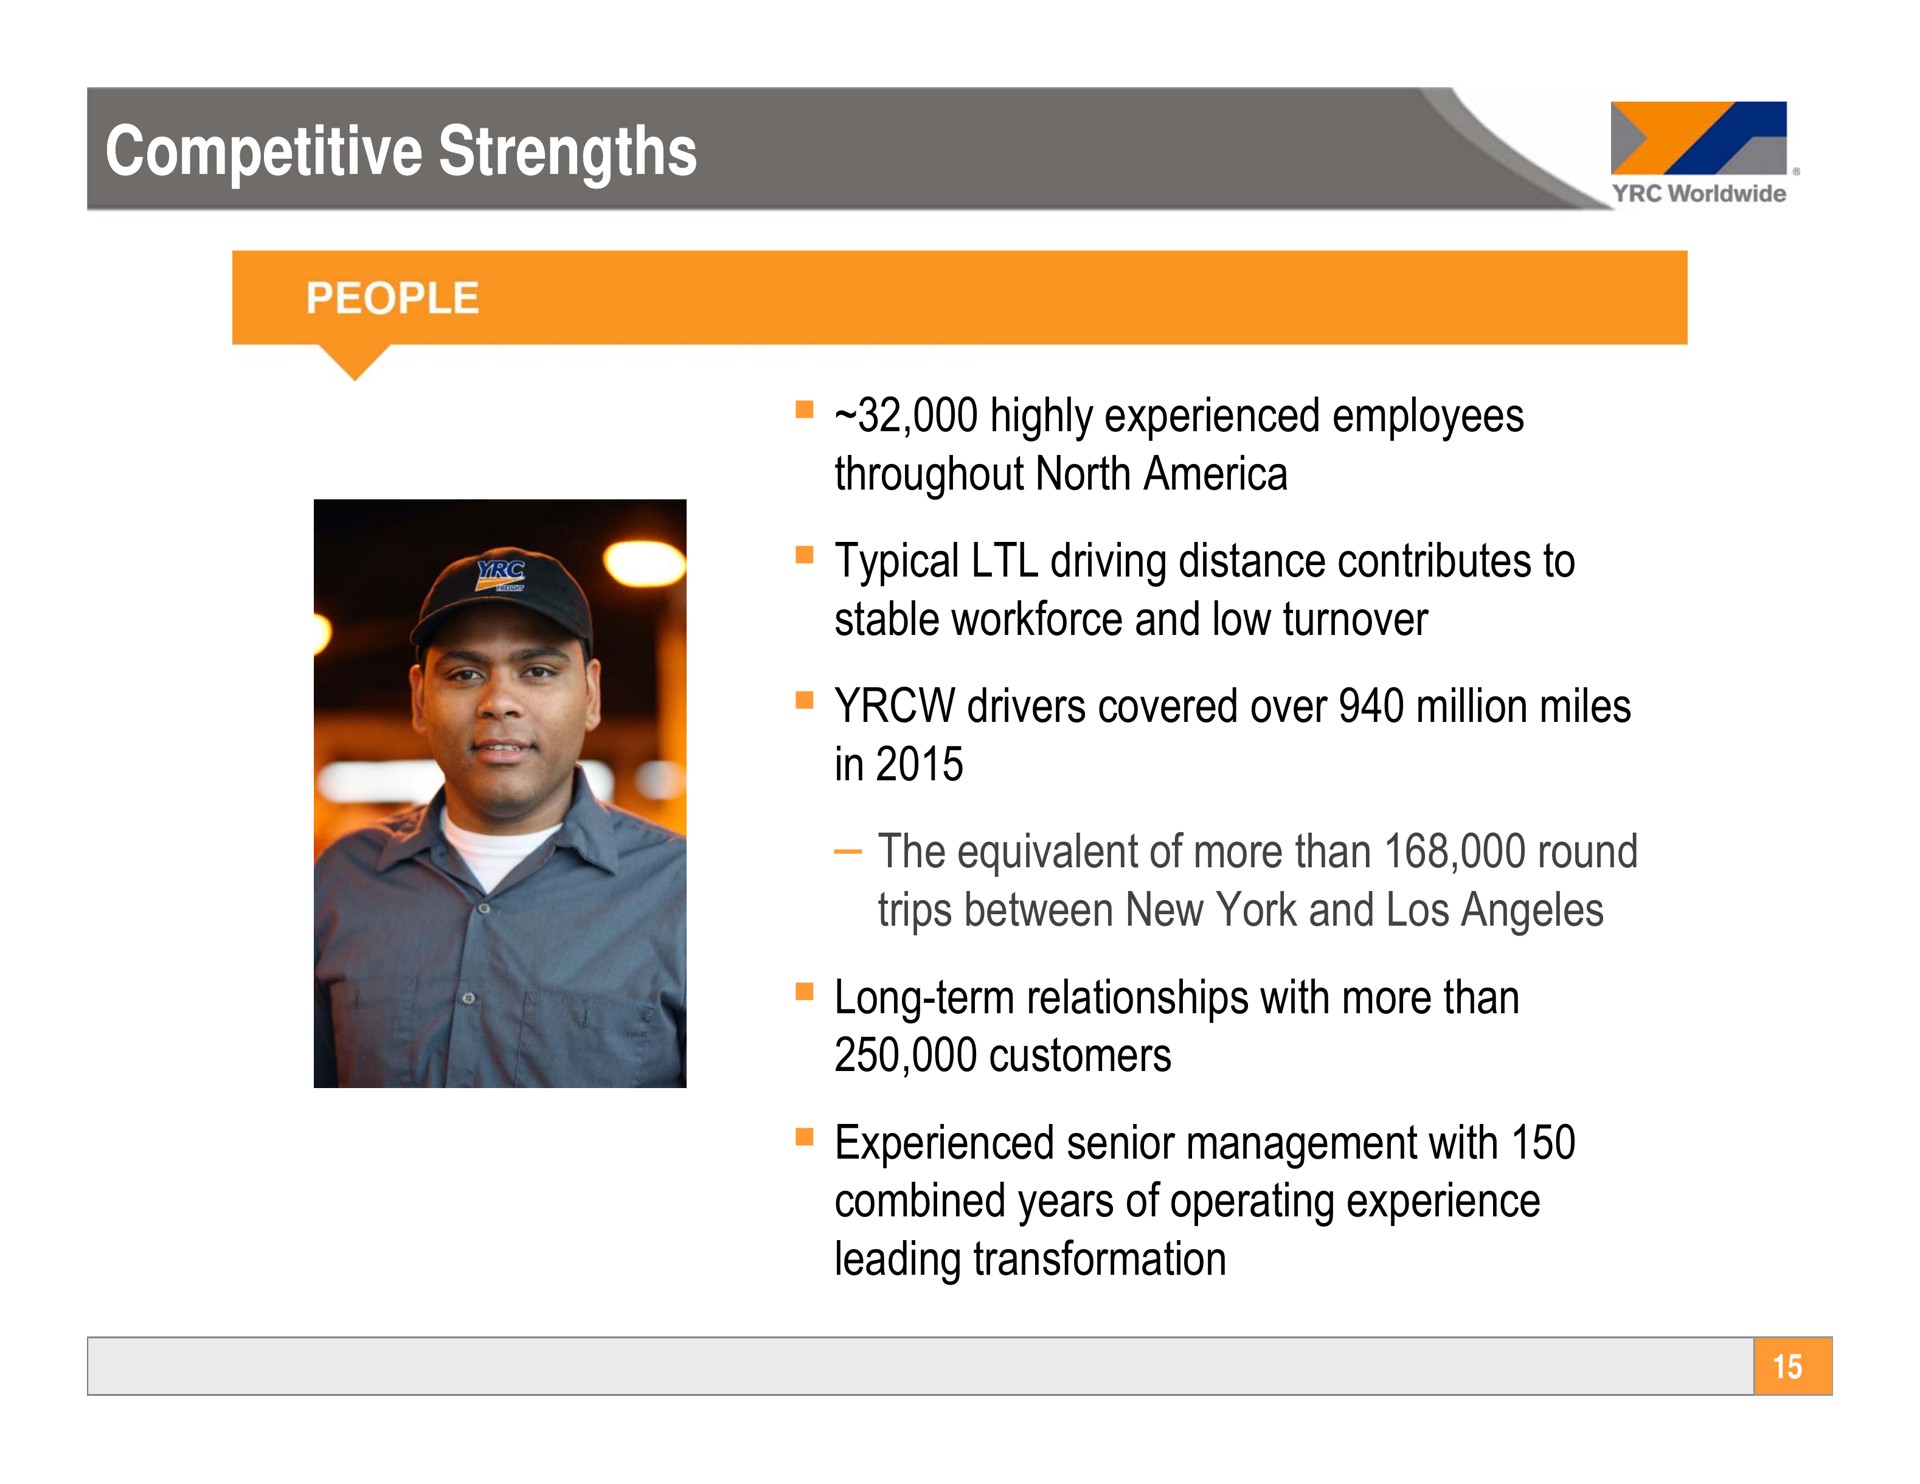 competitive strengths competitive strengths highly experienced employees throughout north typical driving distance contributes to stable and low turnover drivers covered over million miles in the equivalent of more than round trips between new york and long term relationships with more than customers experienced senior management with combined years of operating experience leading transformation trios | Yellow Corporation